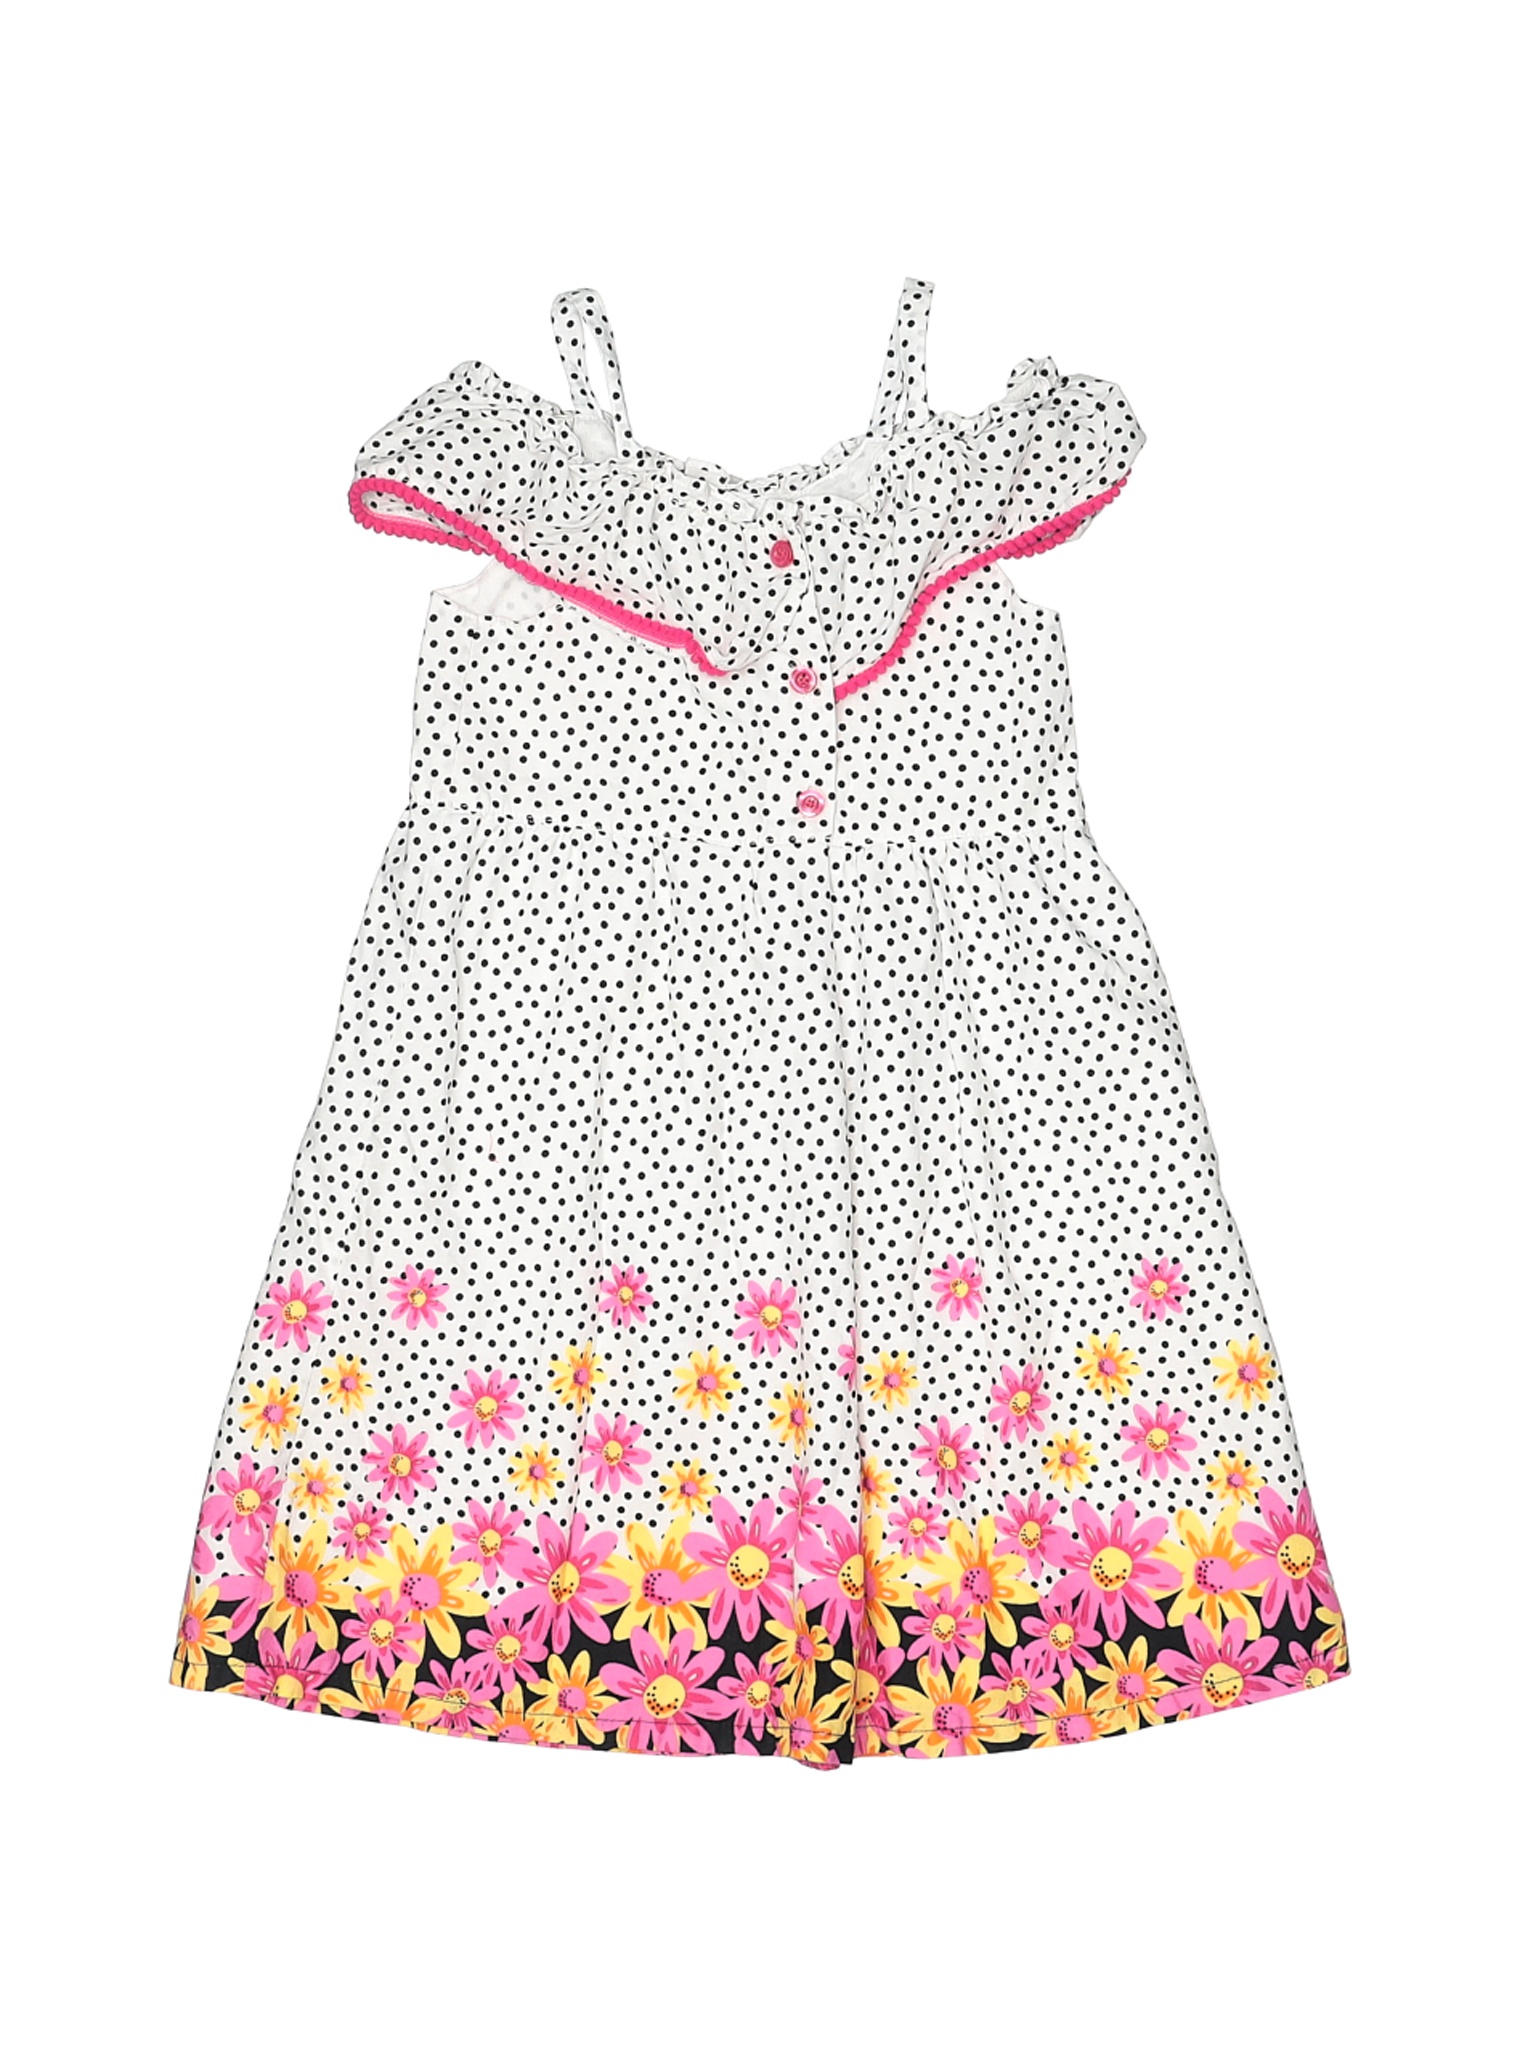 penelope mack baby clothes